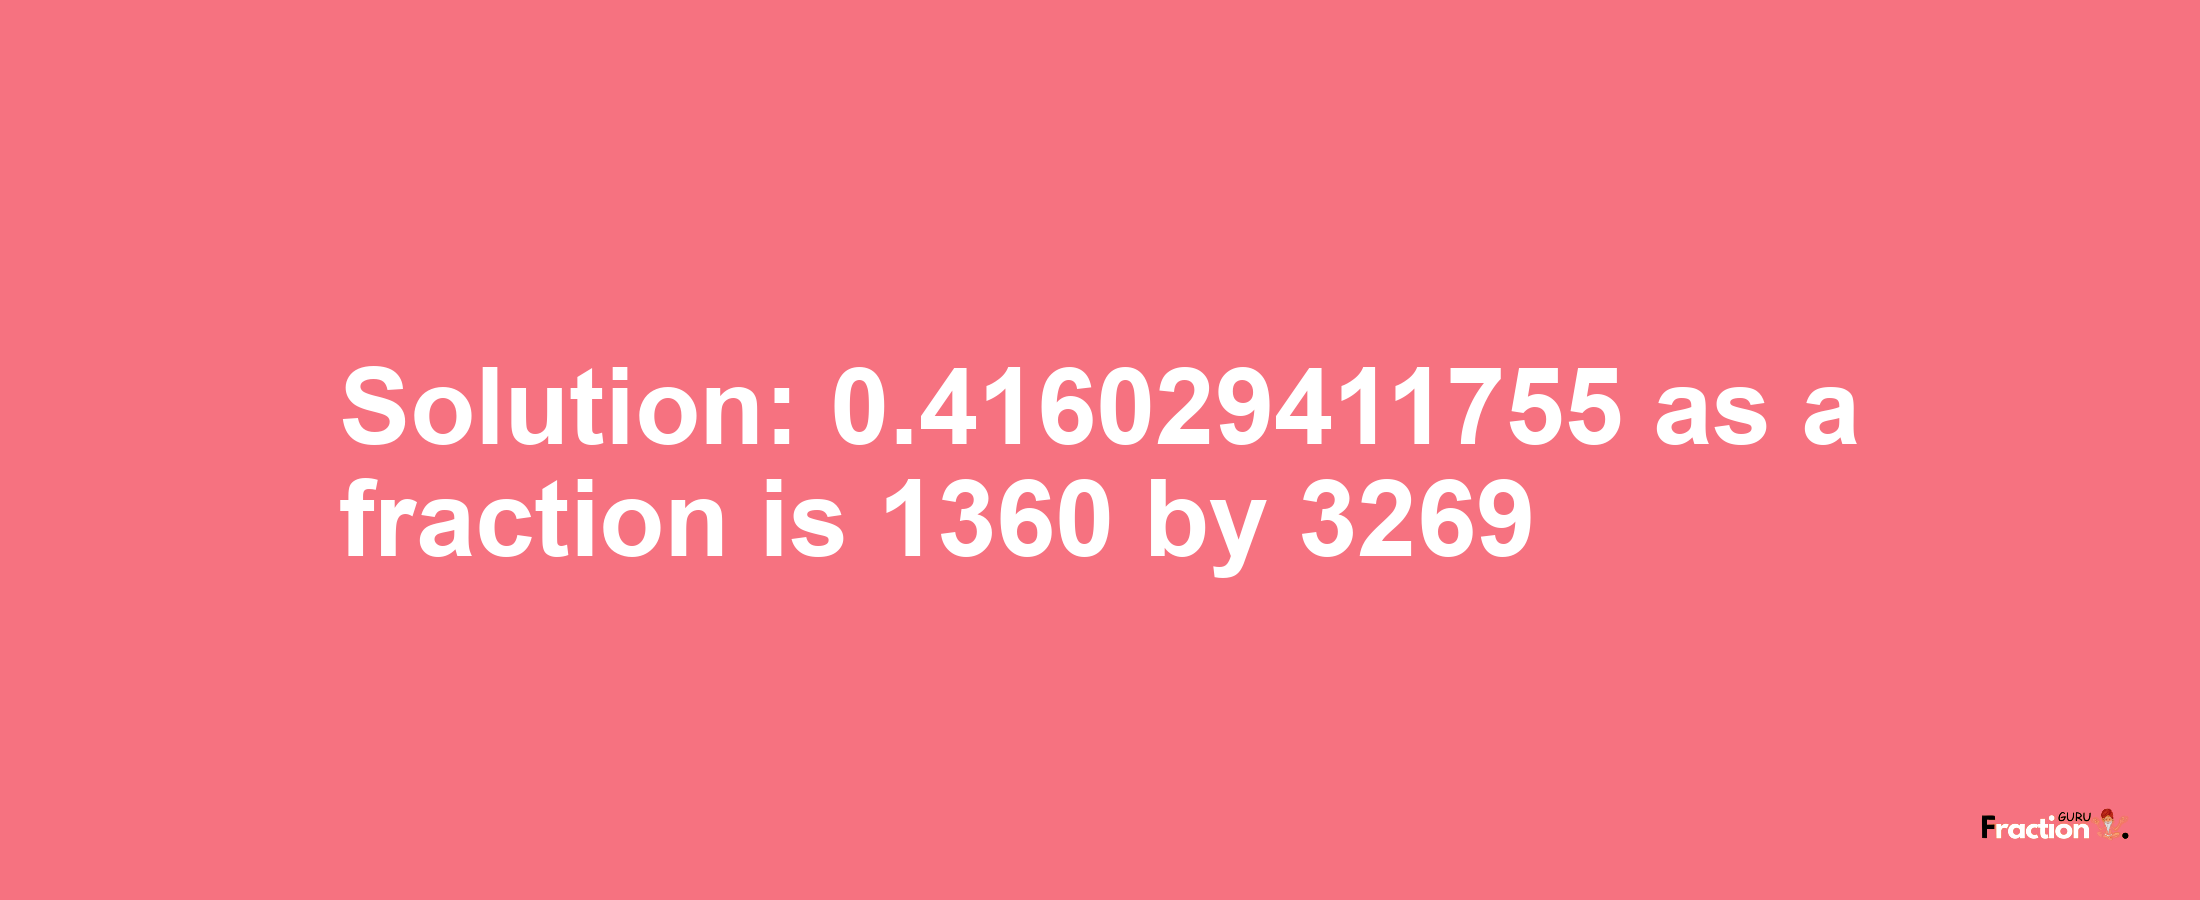 Solution:0.416029411755 as a fraction is 1360/3269